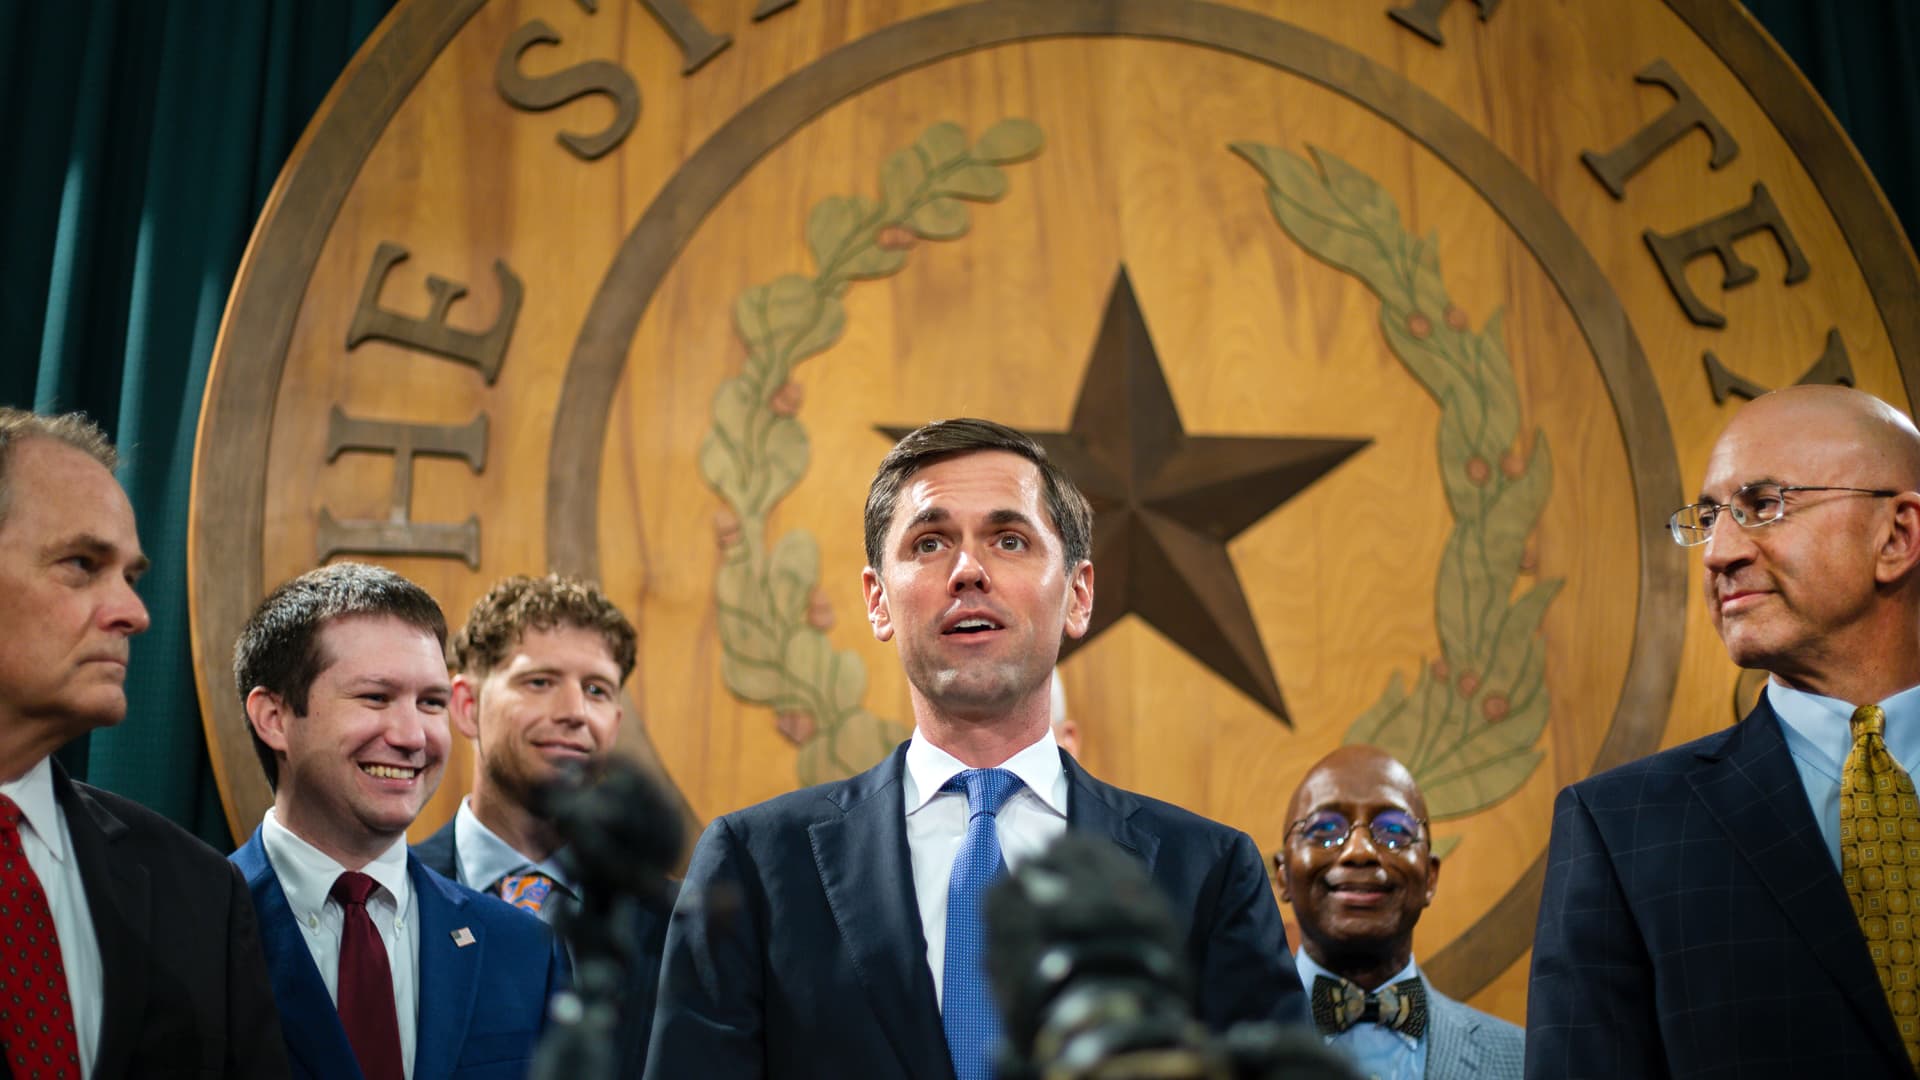 U.S. Rep. Mayes Middleton (R-TX) (C) of the Texas Freedom Caucus addresses the media in the Texas Capitol on July 13, 2021 in Austin, Texas.